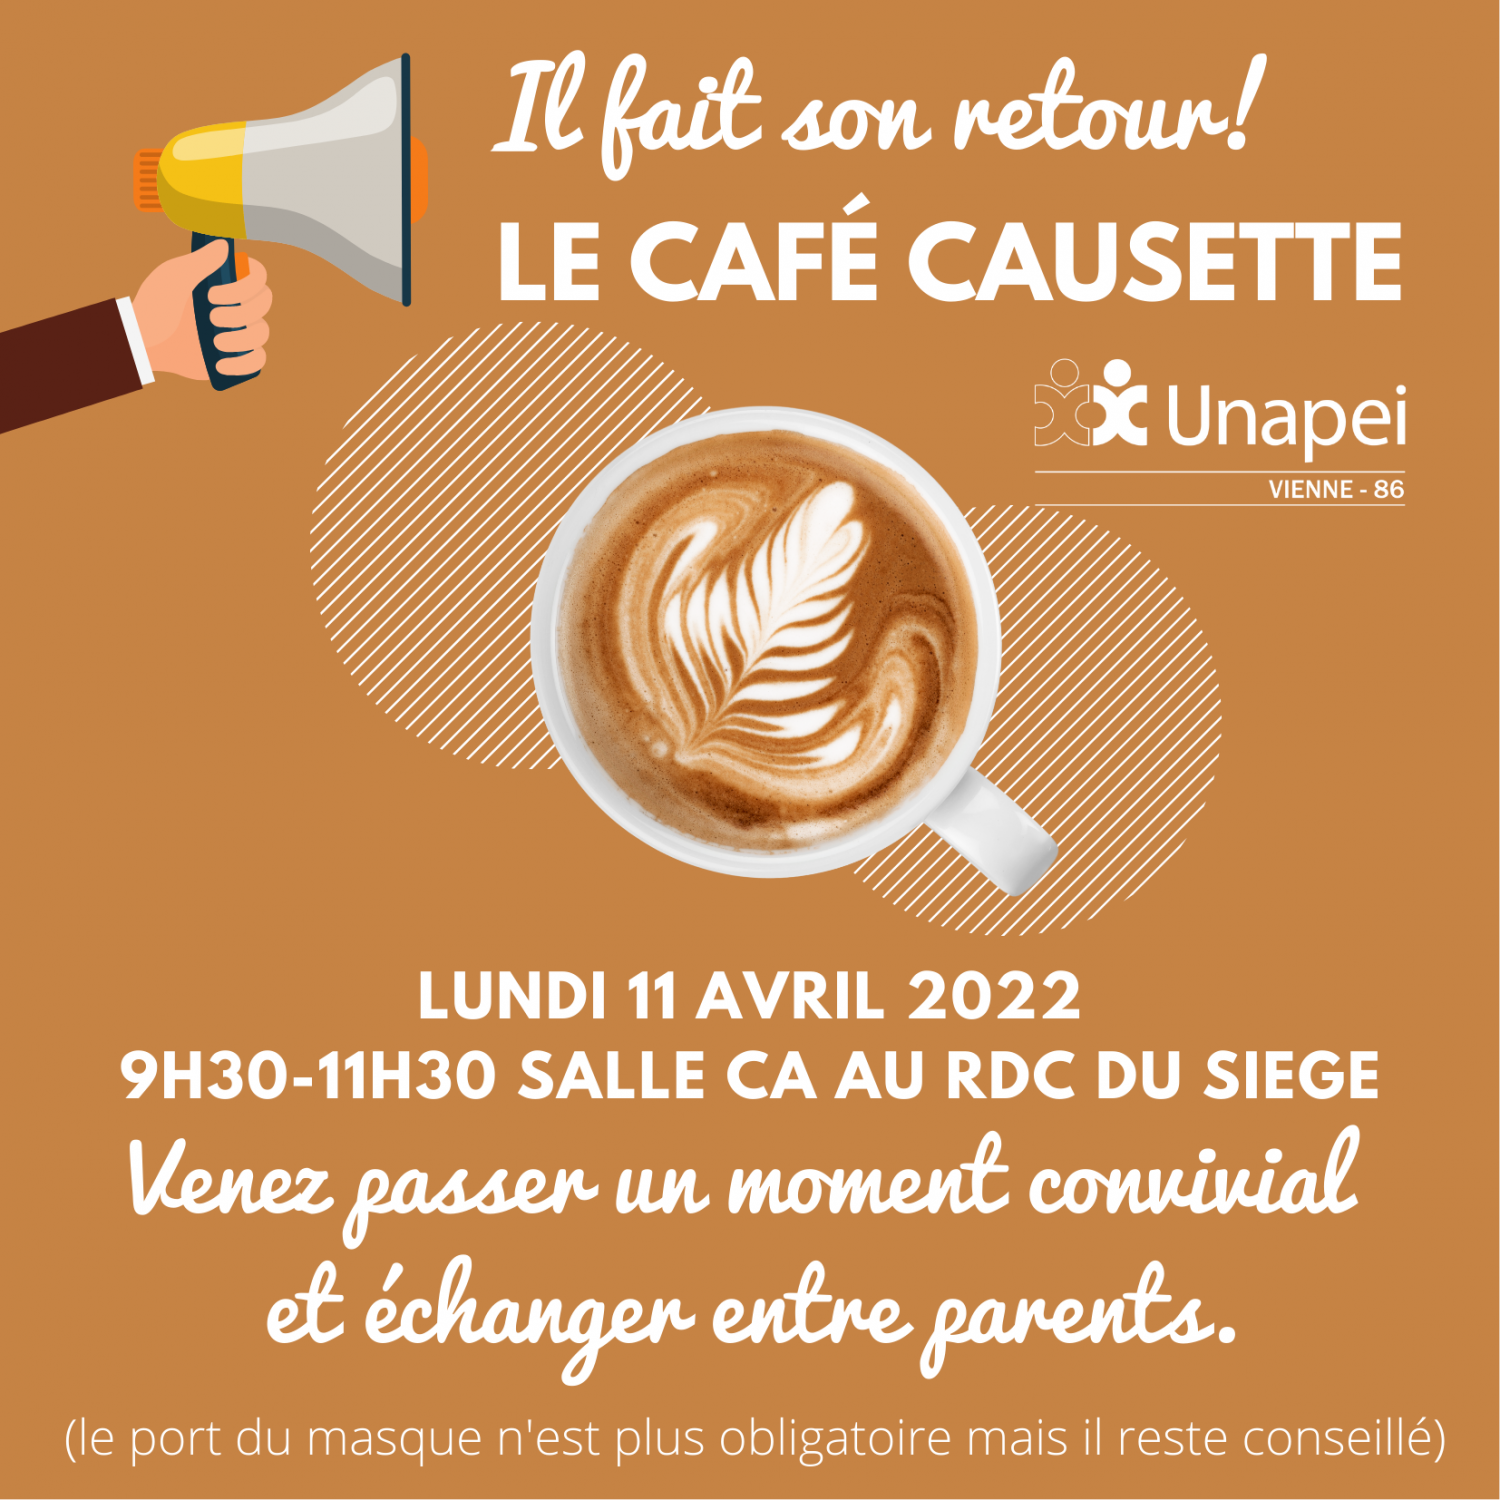 20220404140536-2022-04-11-cafe-causette.png